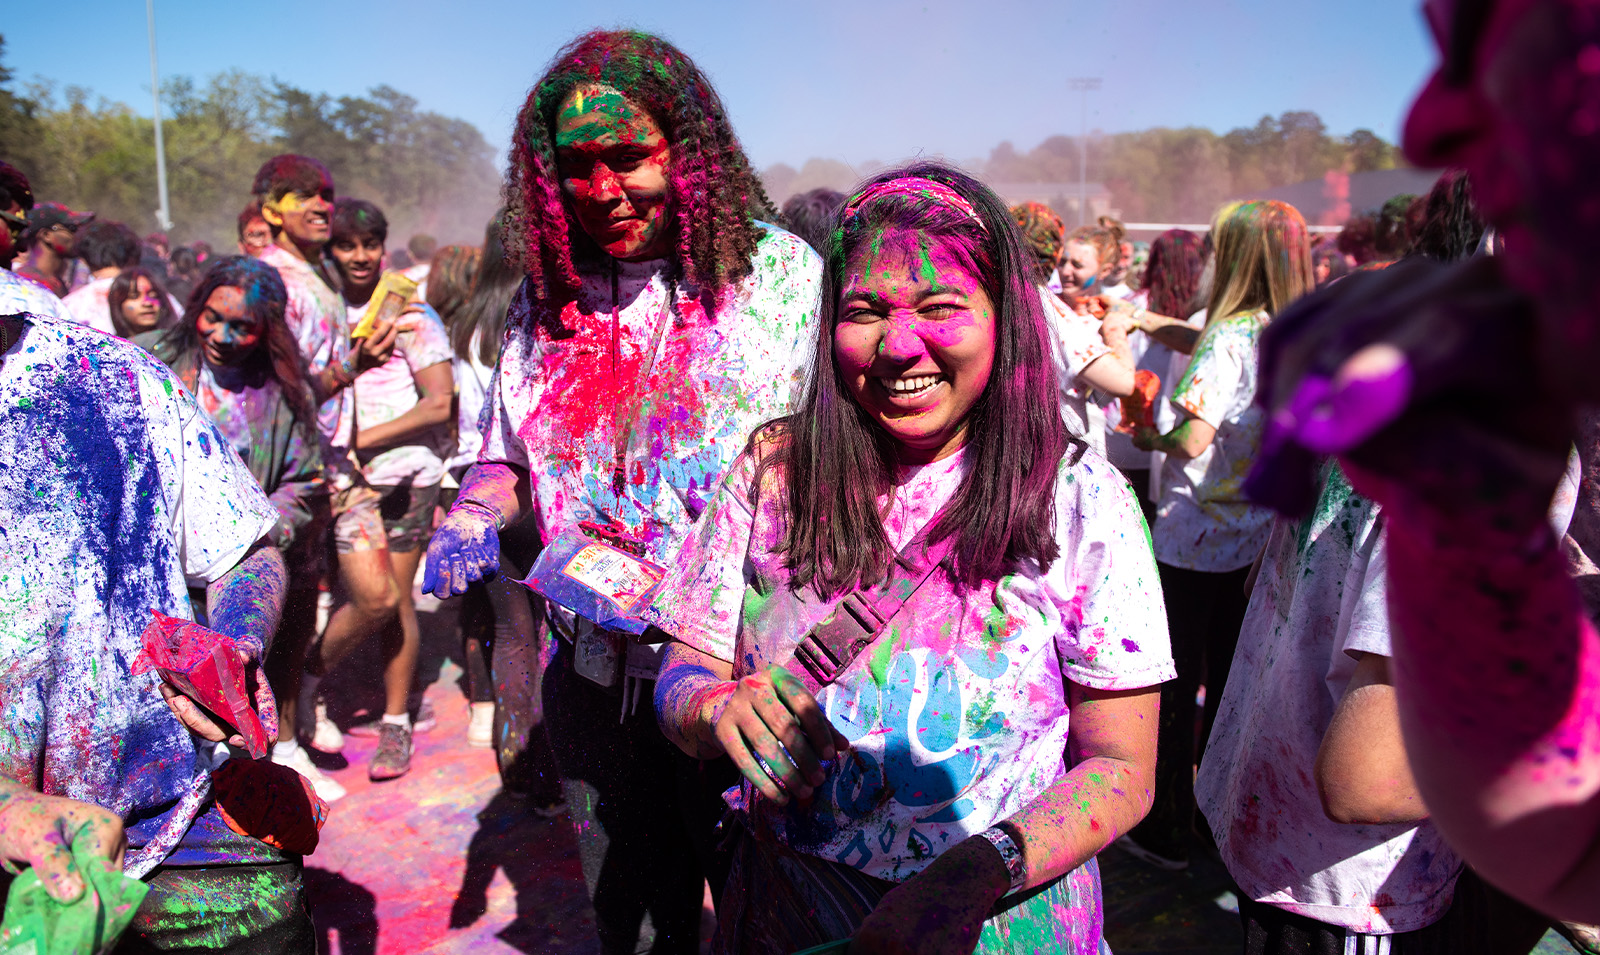 Two students covered in paint celebrating Holi.